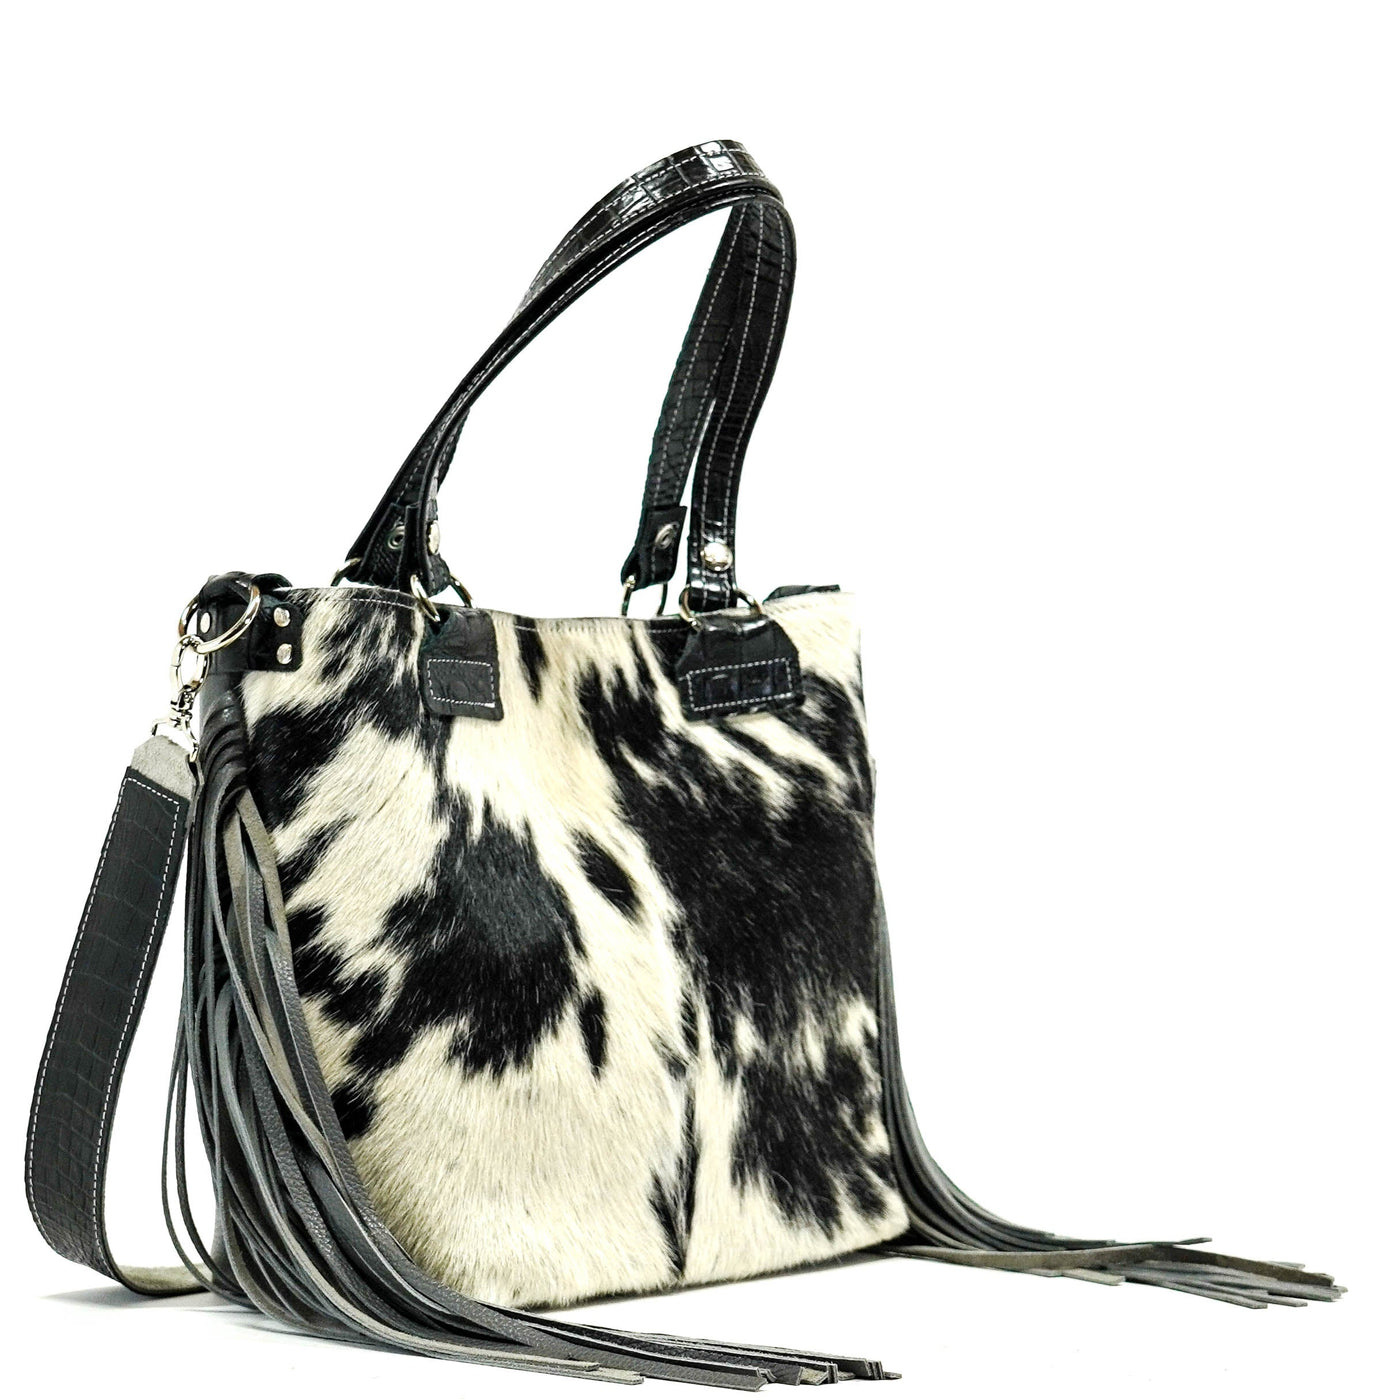 Taylor - Black & White w/ No Embossed-Taylor-Western-Cowhide-Bags-Handmade-Products-Gifts-Dancing Cactus Designs